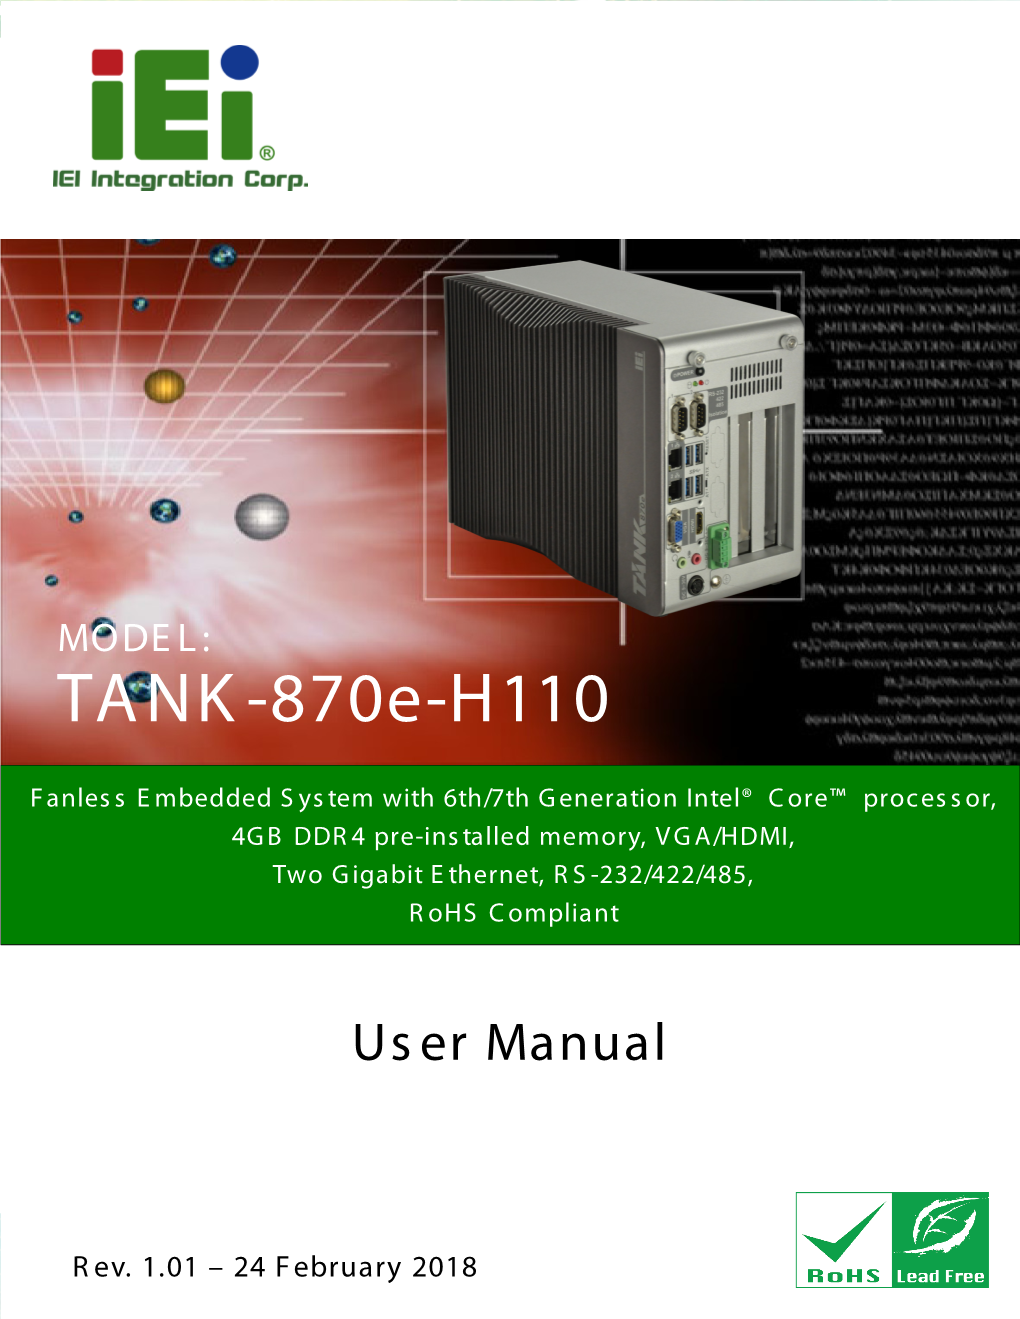 TANK-870E-H110 Embedded System